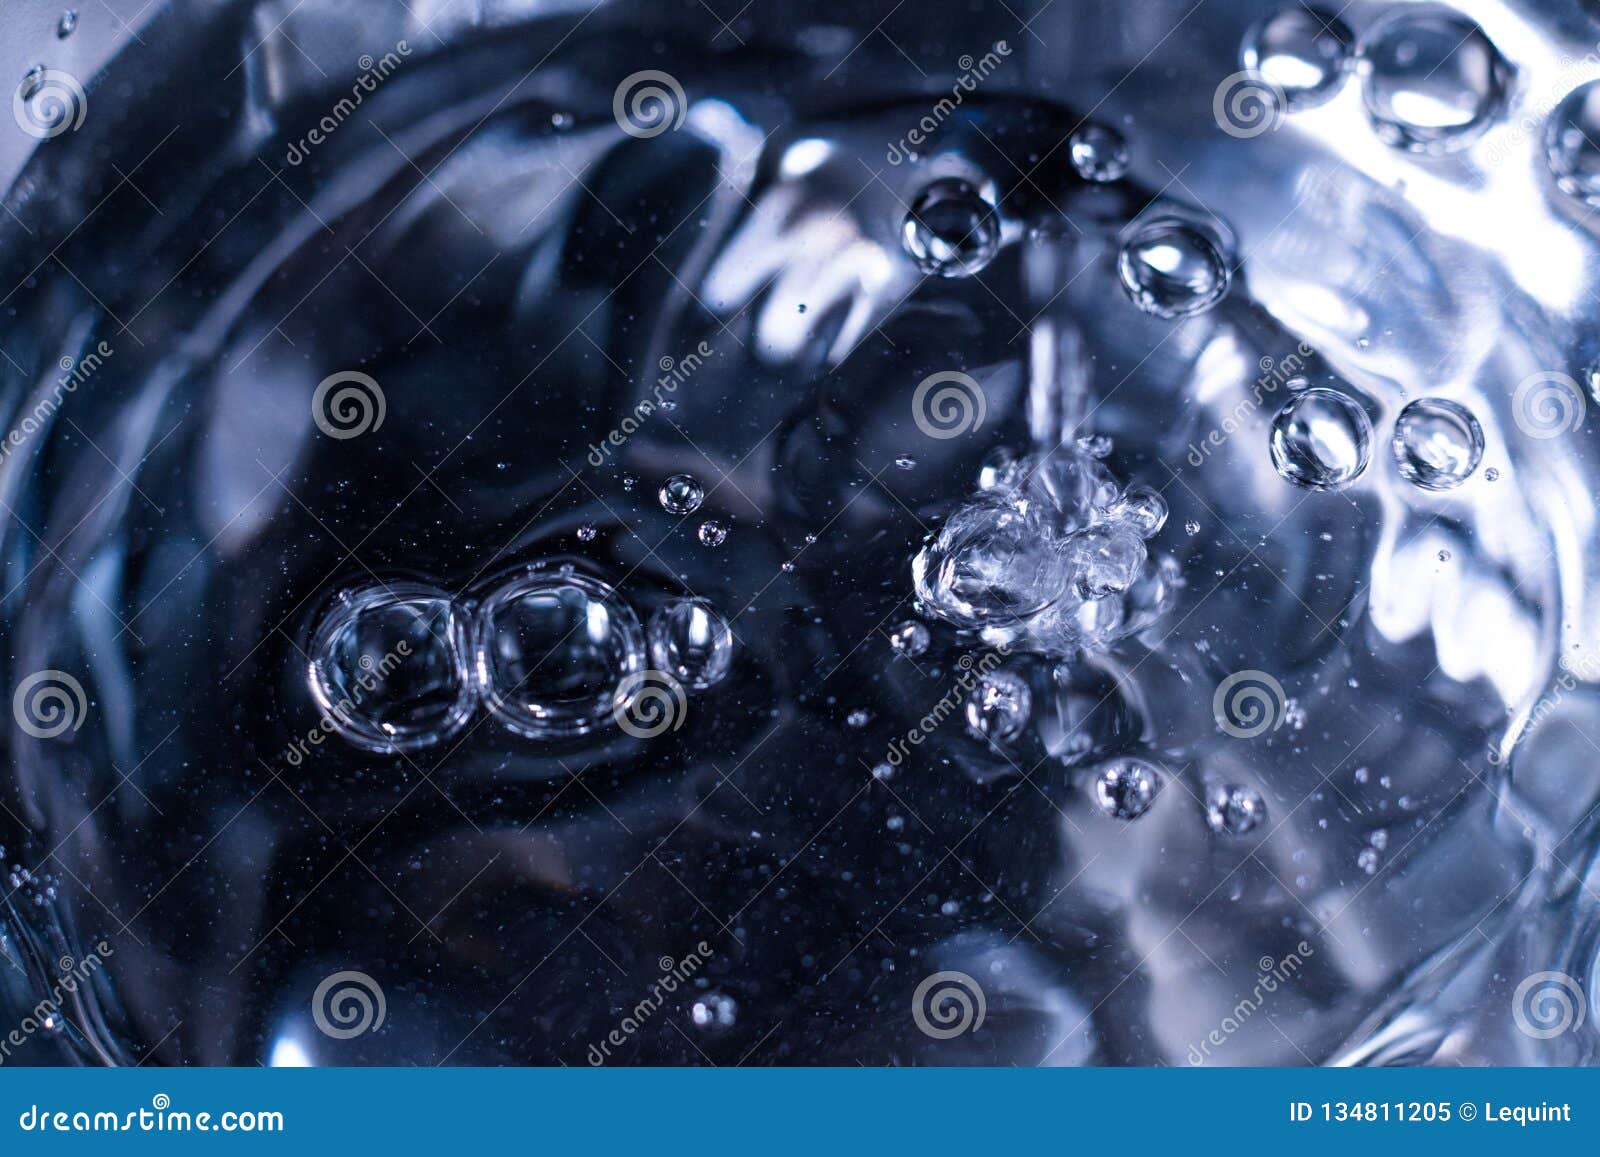 clear clean liquid water fluid poring into glass close up abstract